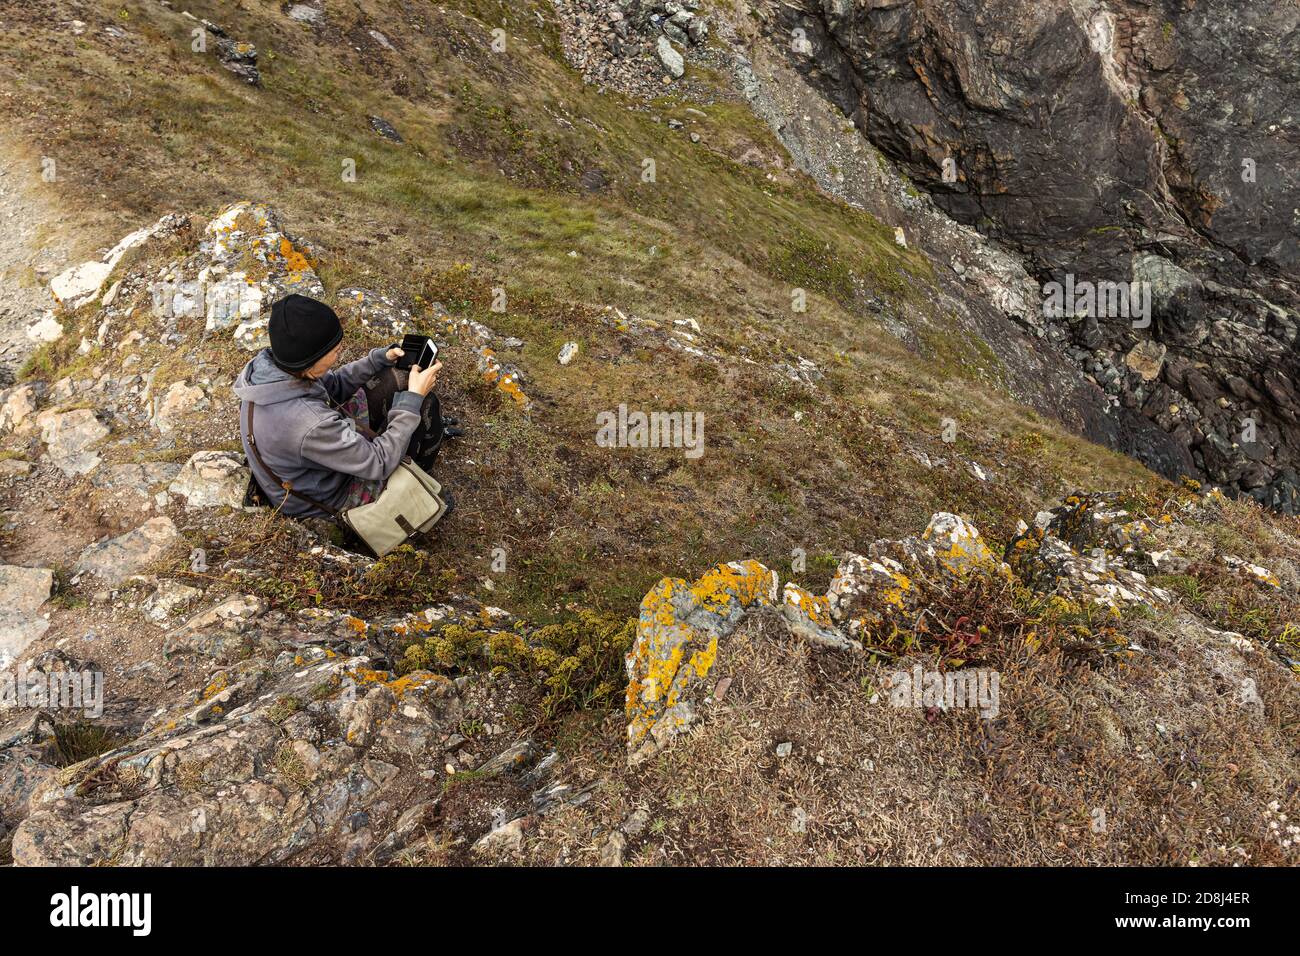 A female wrapped up in warm clothing watching sitting on a cliff and taking a photo with a phone Stock Photo